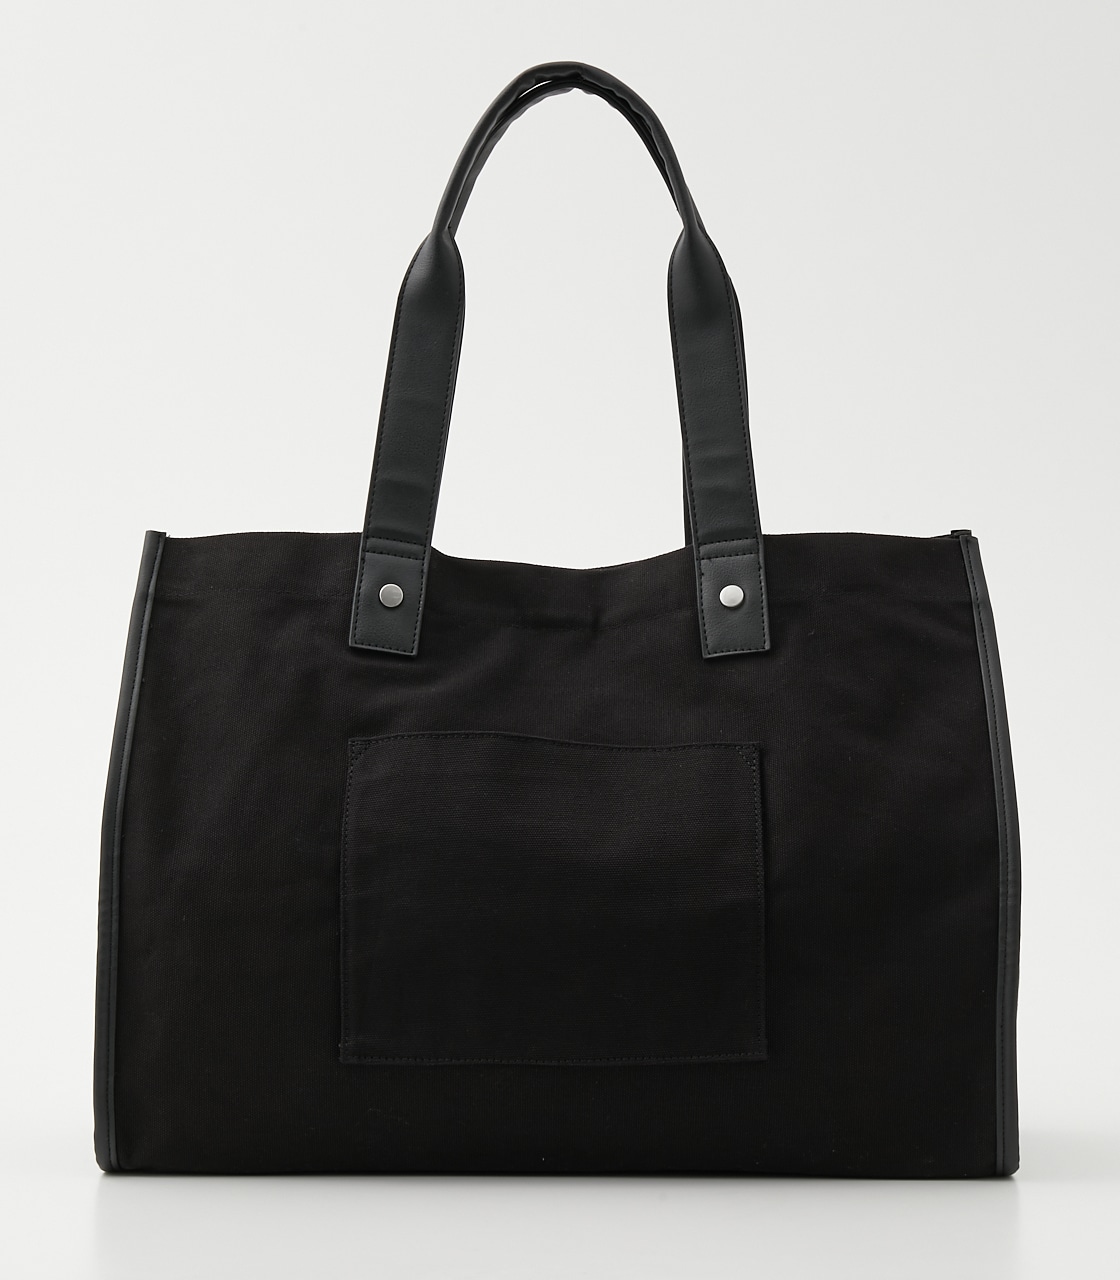 LINEN LIKE BIG TOTE BAG/リネンライクビッグトートバッグ 詳細画像 BLK 1